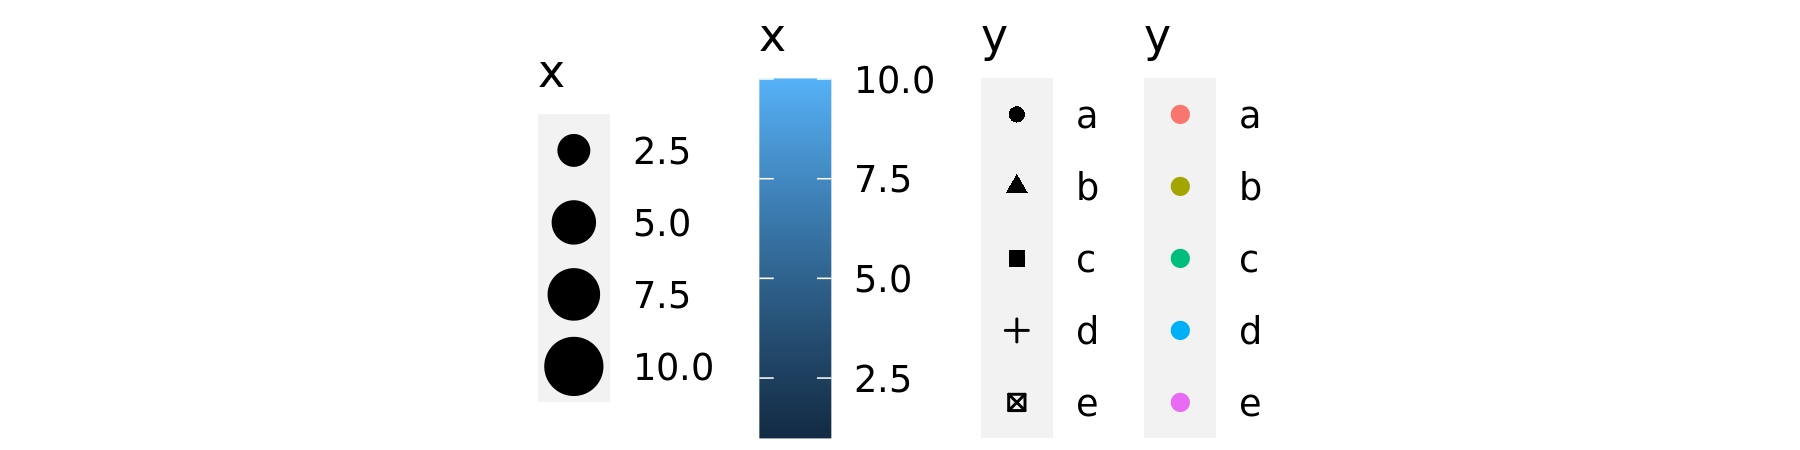 Examples of legends from four different scales. From left to right: continuous variable mapped to size, and to colour, discrete variable mapped to shape, and to colour. The ordering of scales seems upside-down, but this matches the labelling of the $y$-axis: small values occur at the bottom.